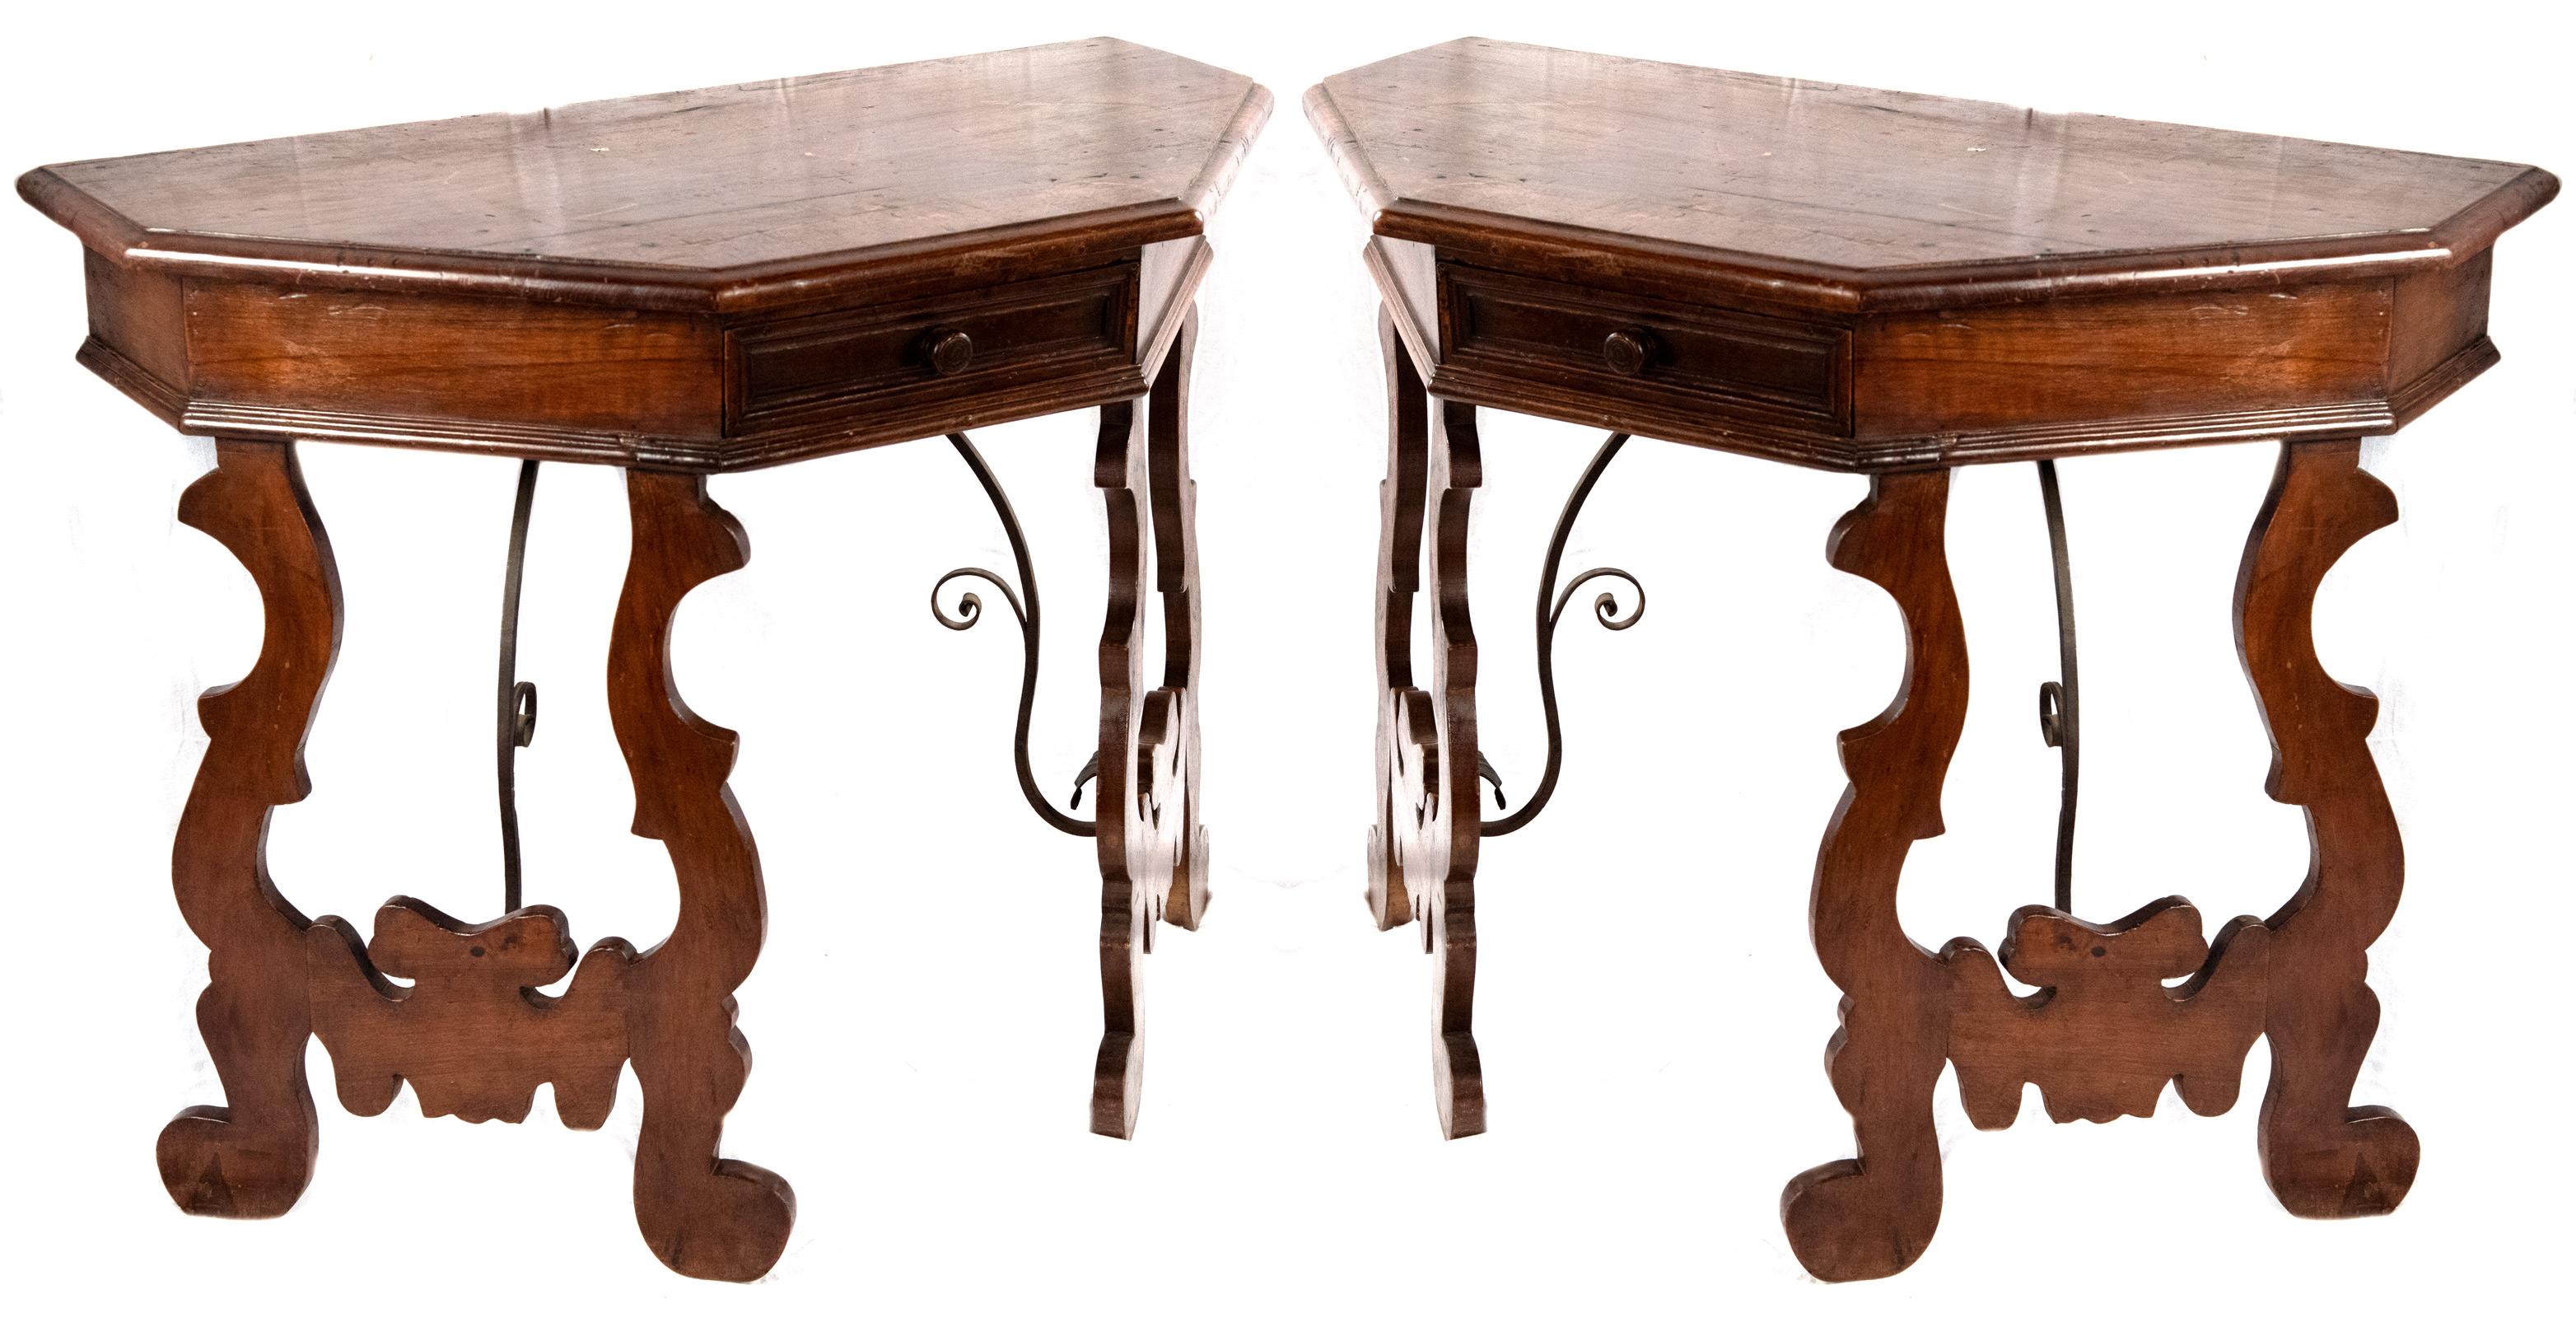 A pair of 18th century Spanish oak console tables, the top with a beveled edge above an unadorned apron fitted with a single small drawer with brass pull, raised on carved c-scroll trestle legs that are supported by scrolling metal braces.